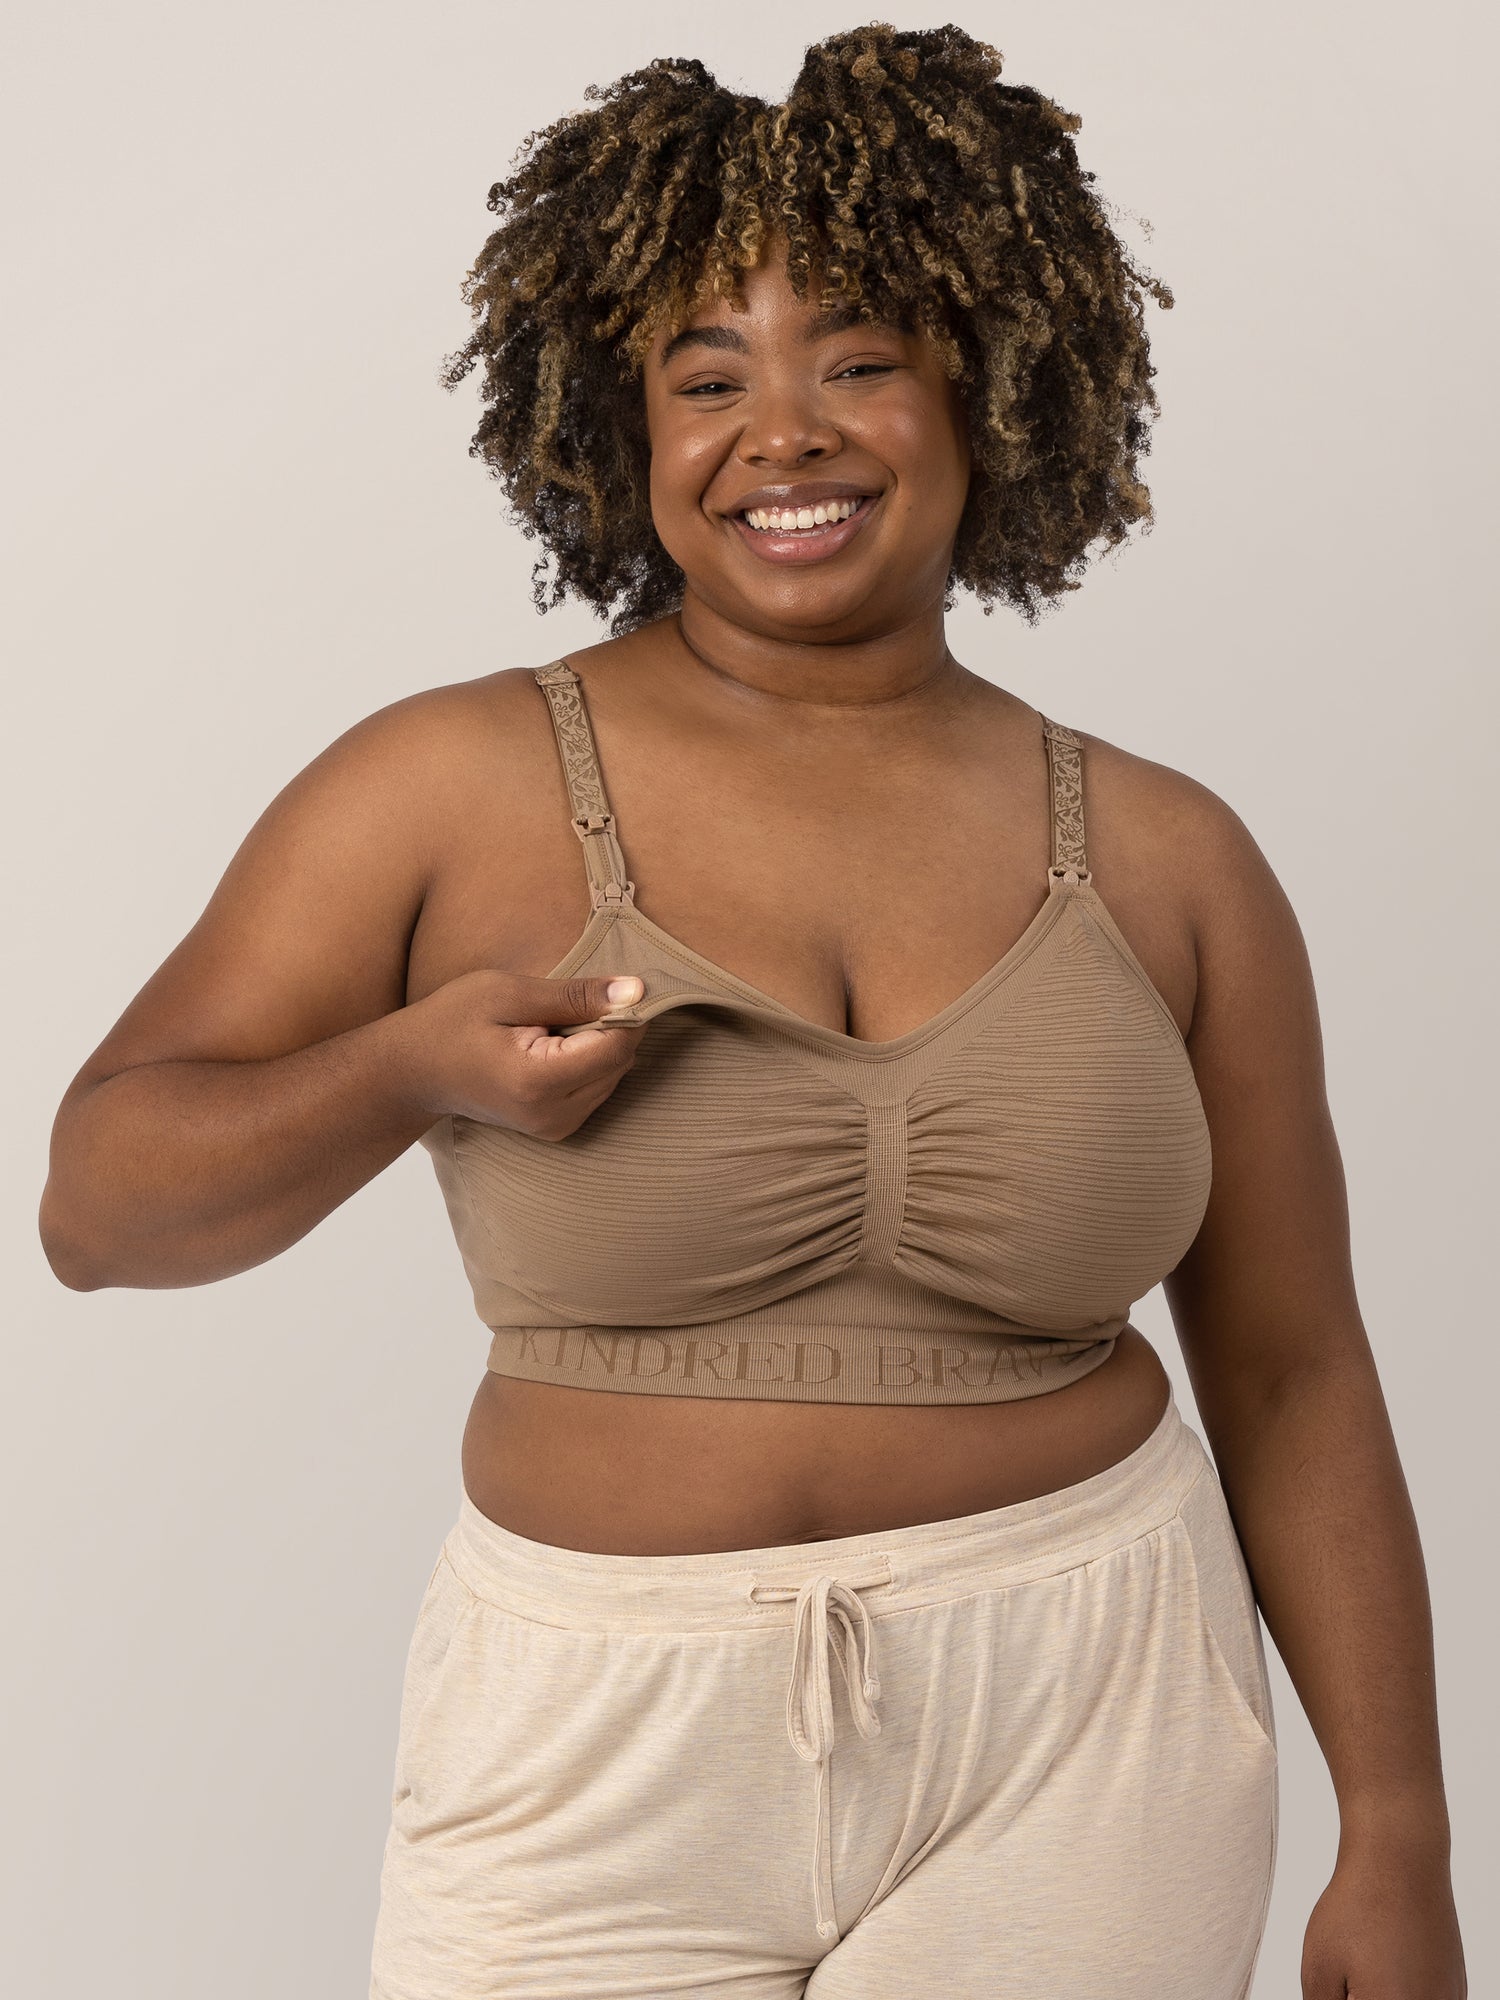 Model wearing the Sublime® Hands-Free Pumping & Nursing Bra in Latte showing the clip down nursing and pumping access